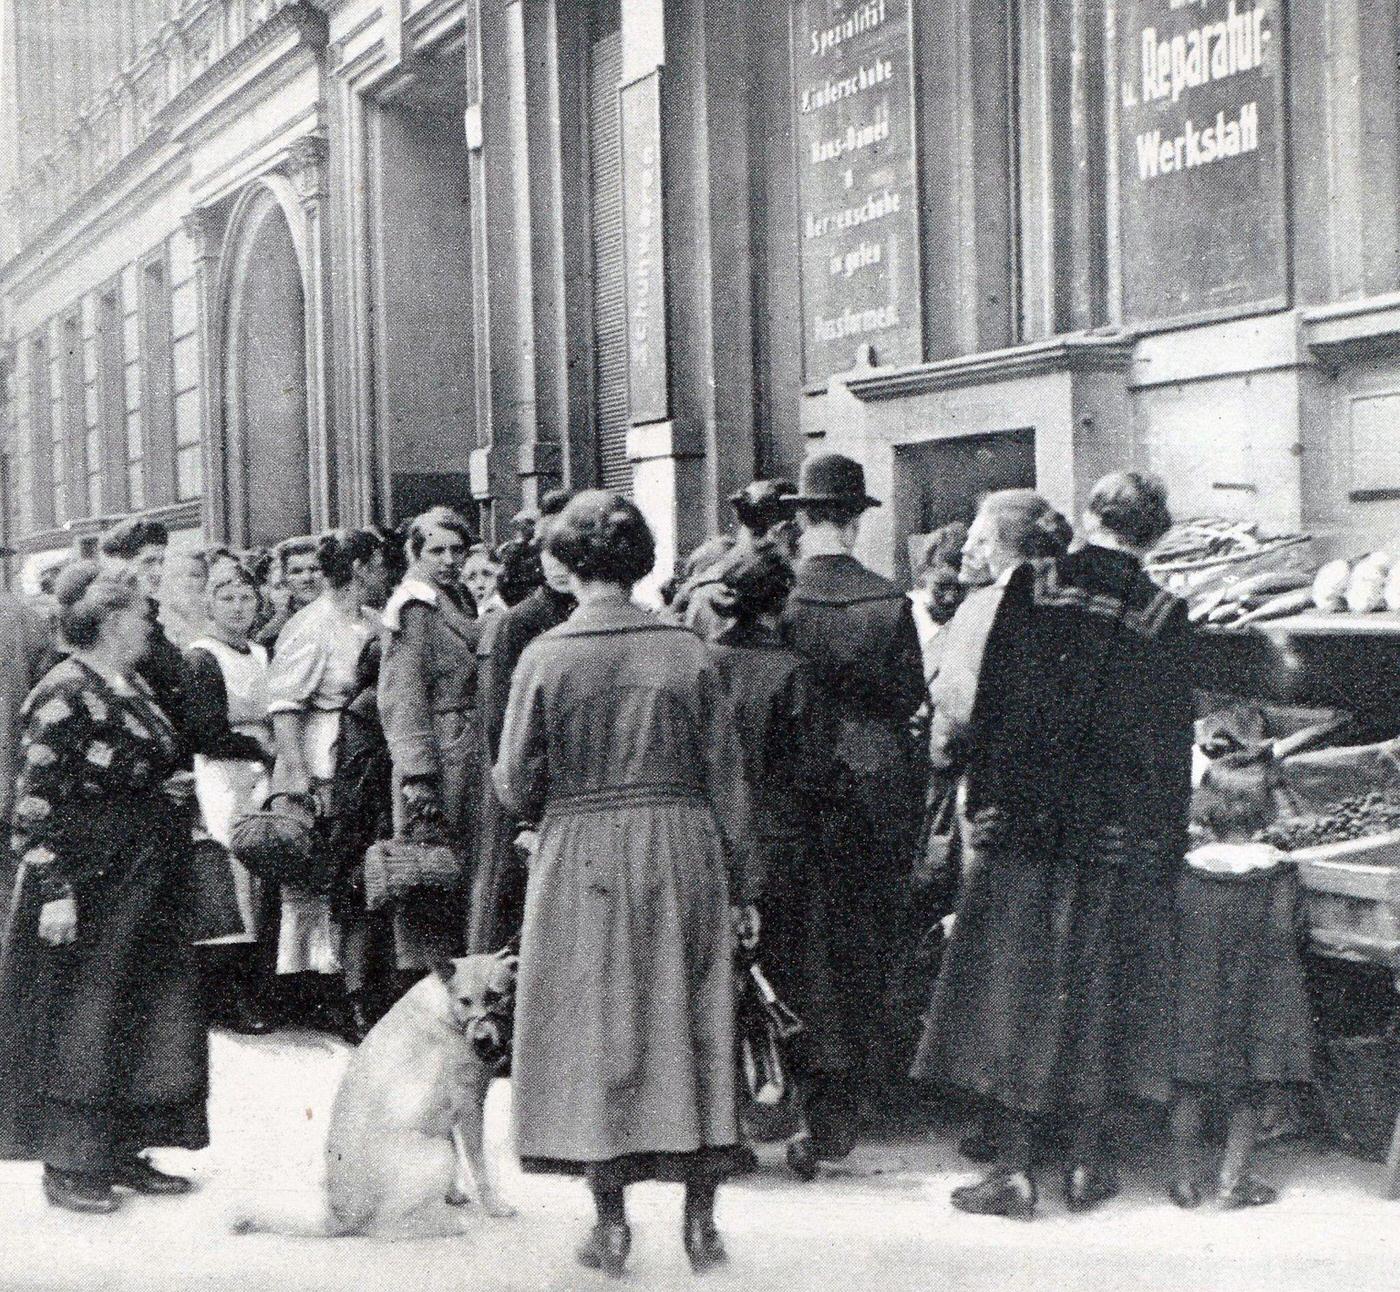 Queues for groceries during Weimar Germany's hyperinflation, 1923.